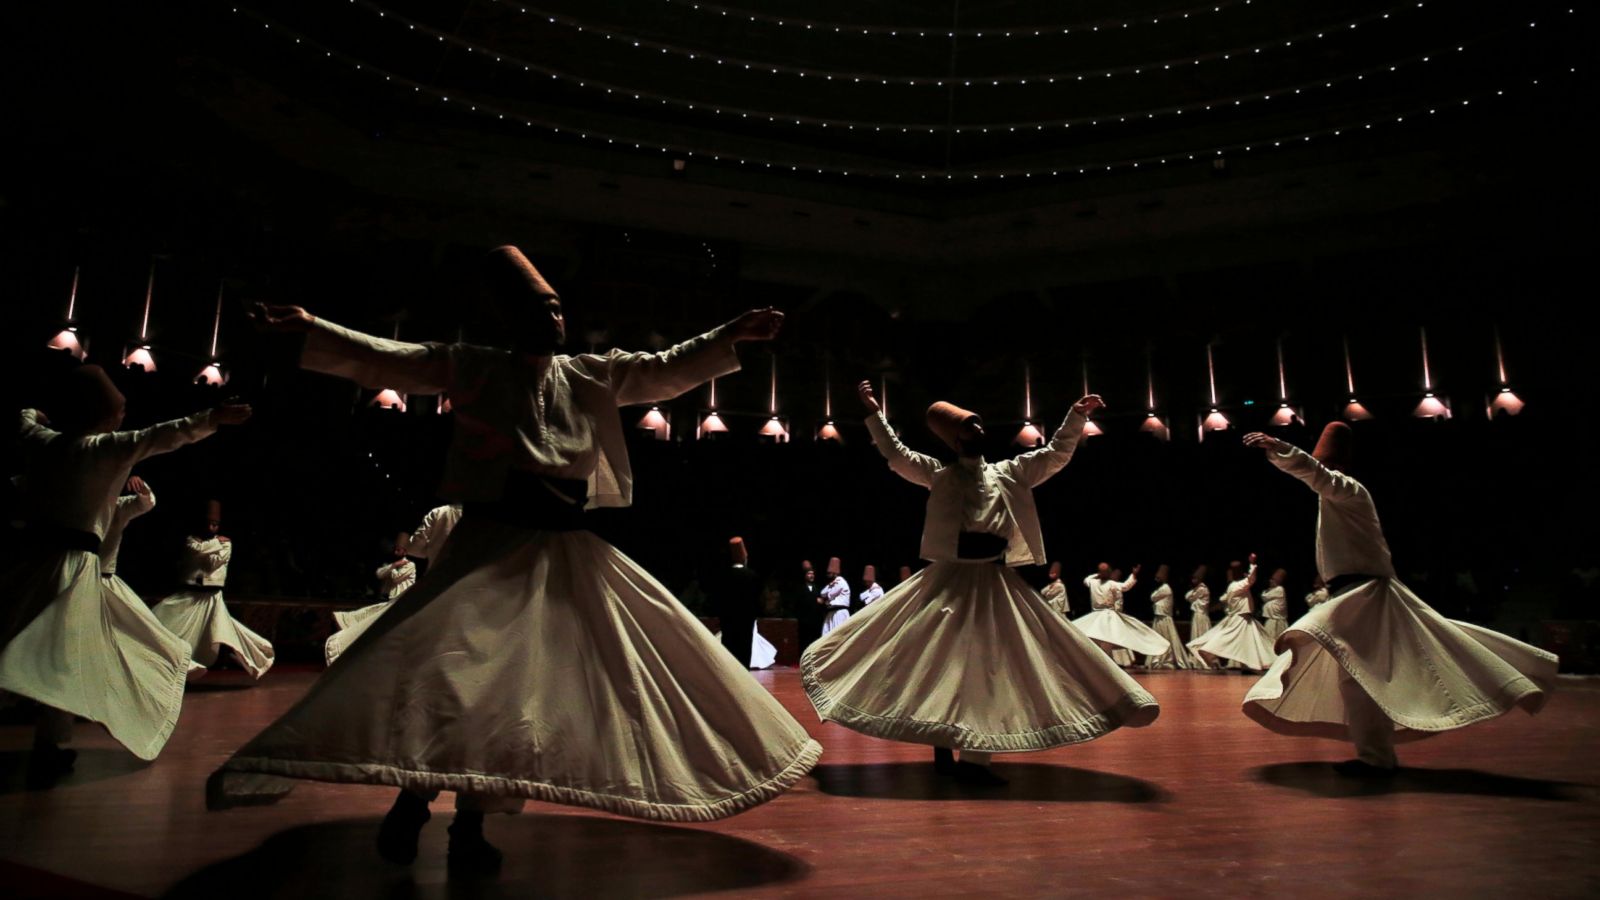 AP PHOTOS: Turkey's whirling dervishes honor Sufi poet